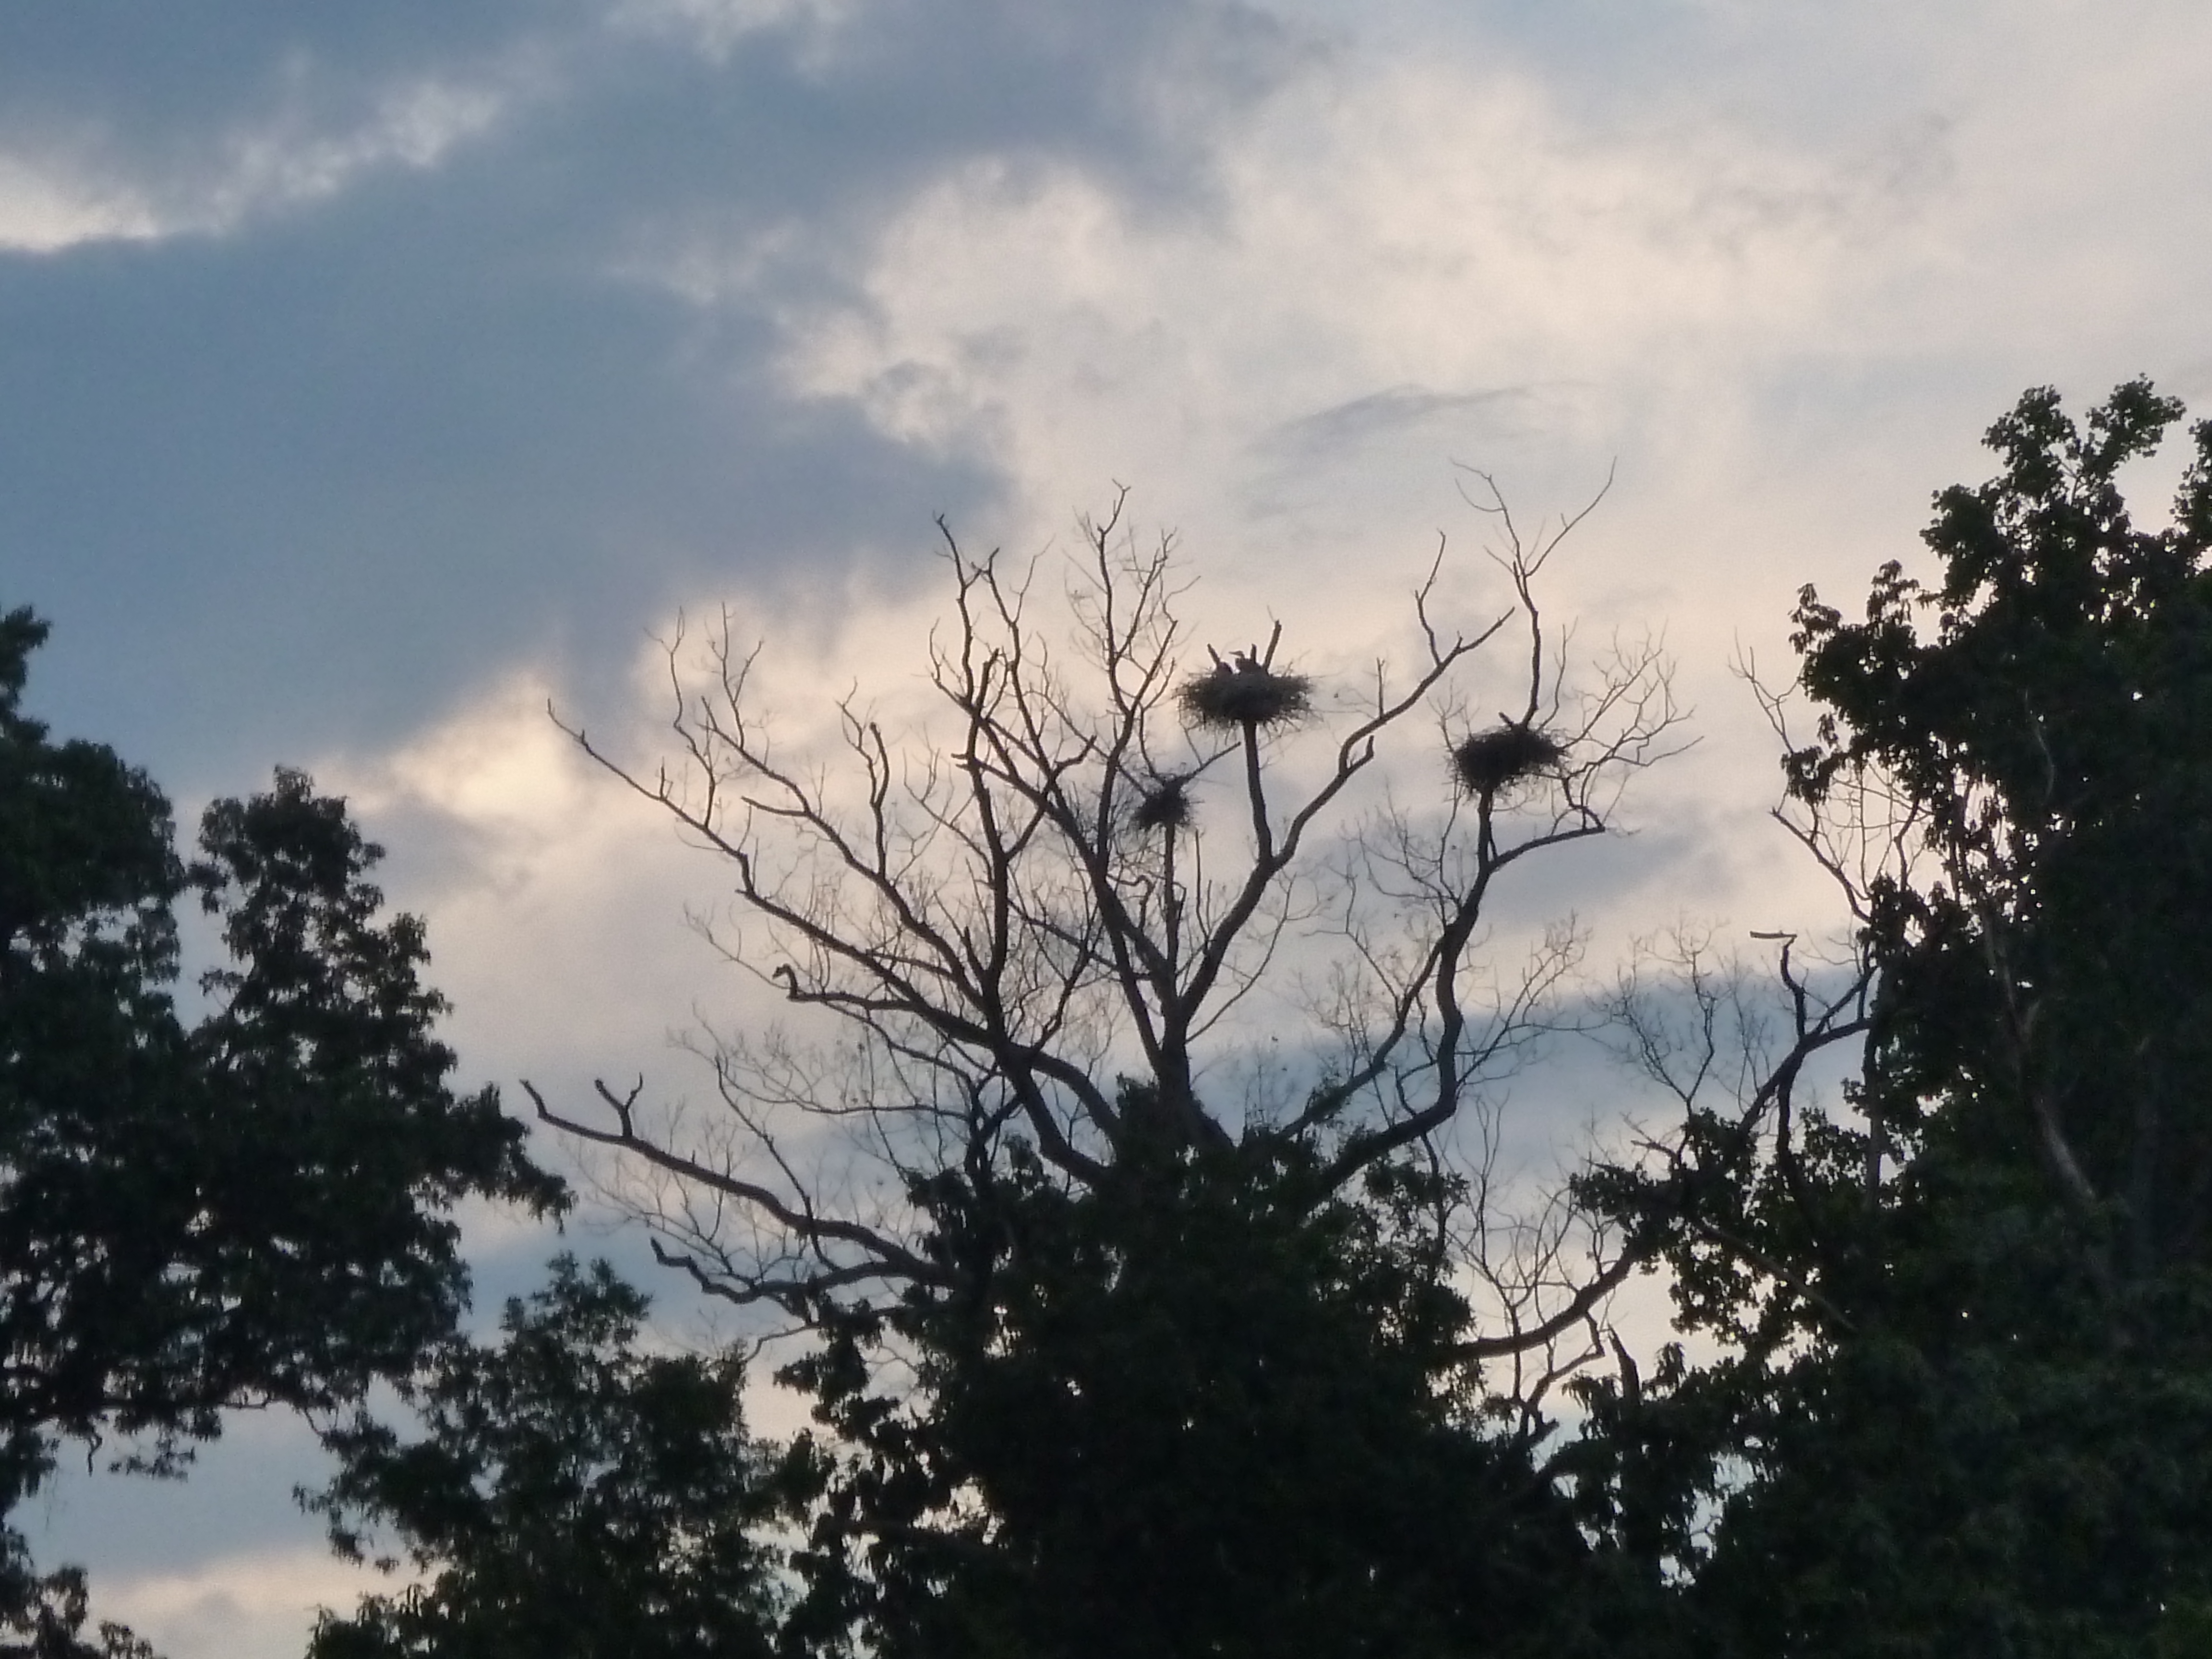 Blue Herons in their nests up Chase Creek, on the Severn River